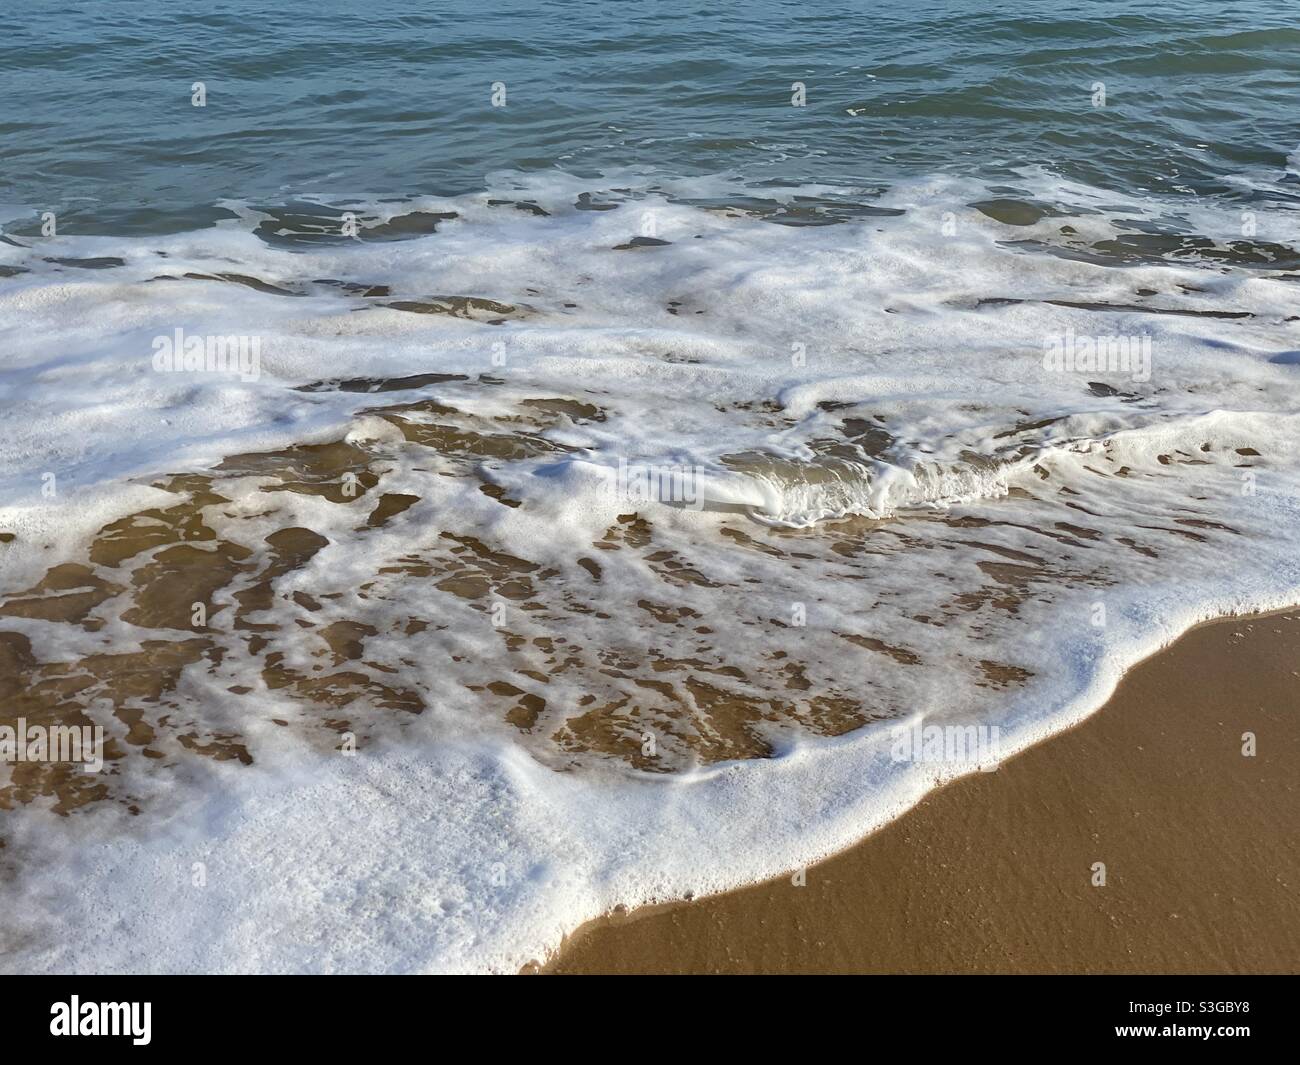 Waves lapping the sea shore Stock Photo